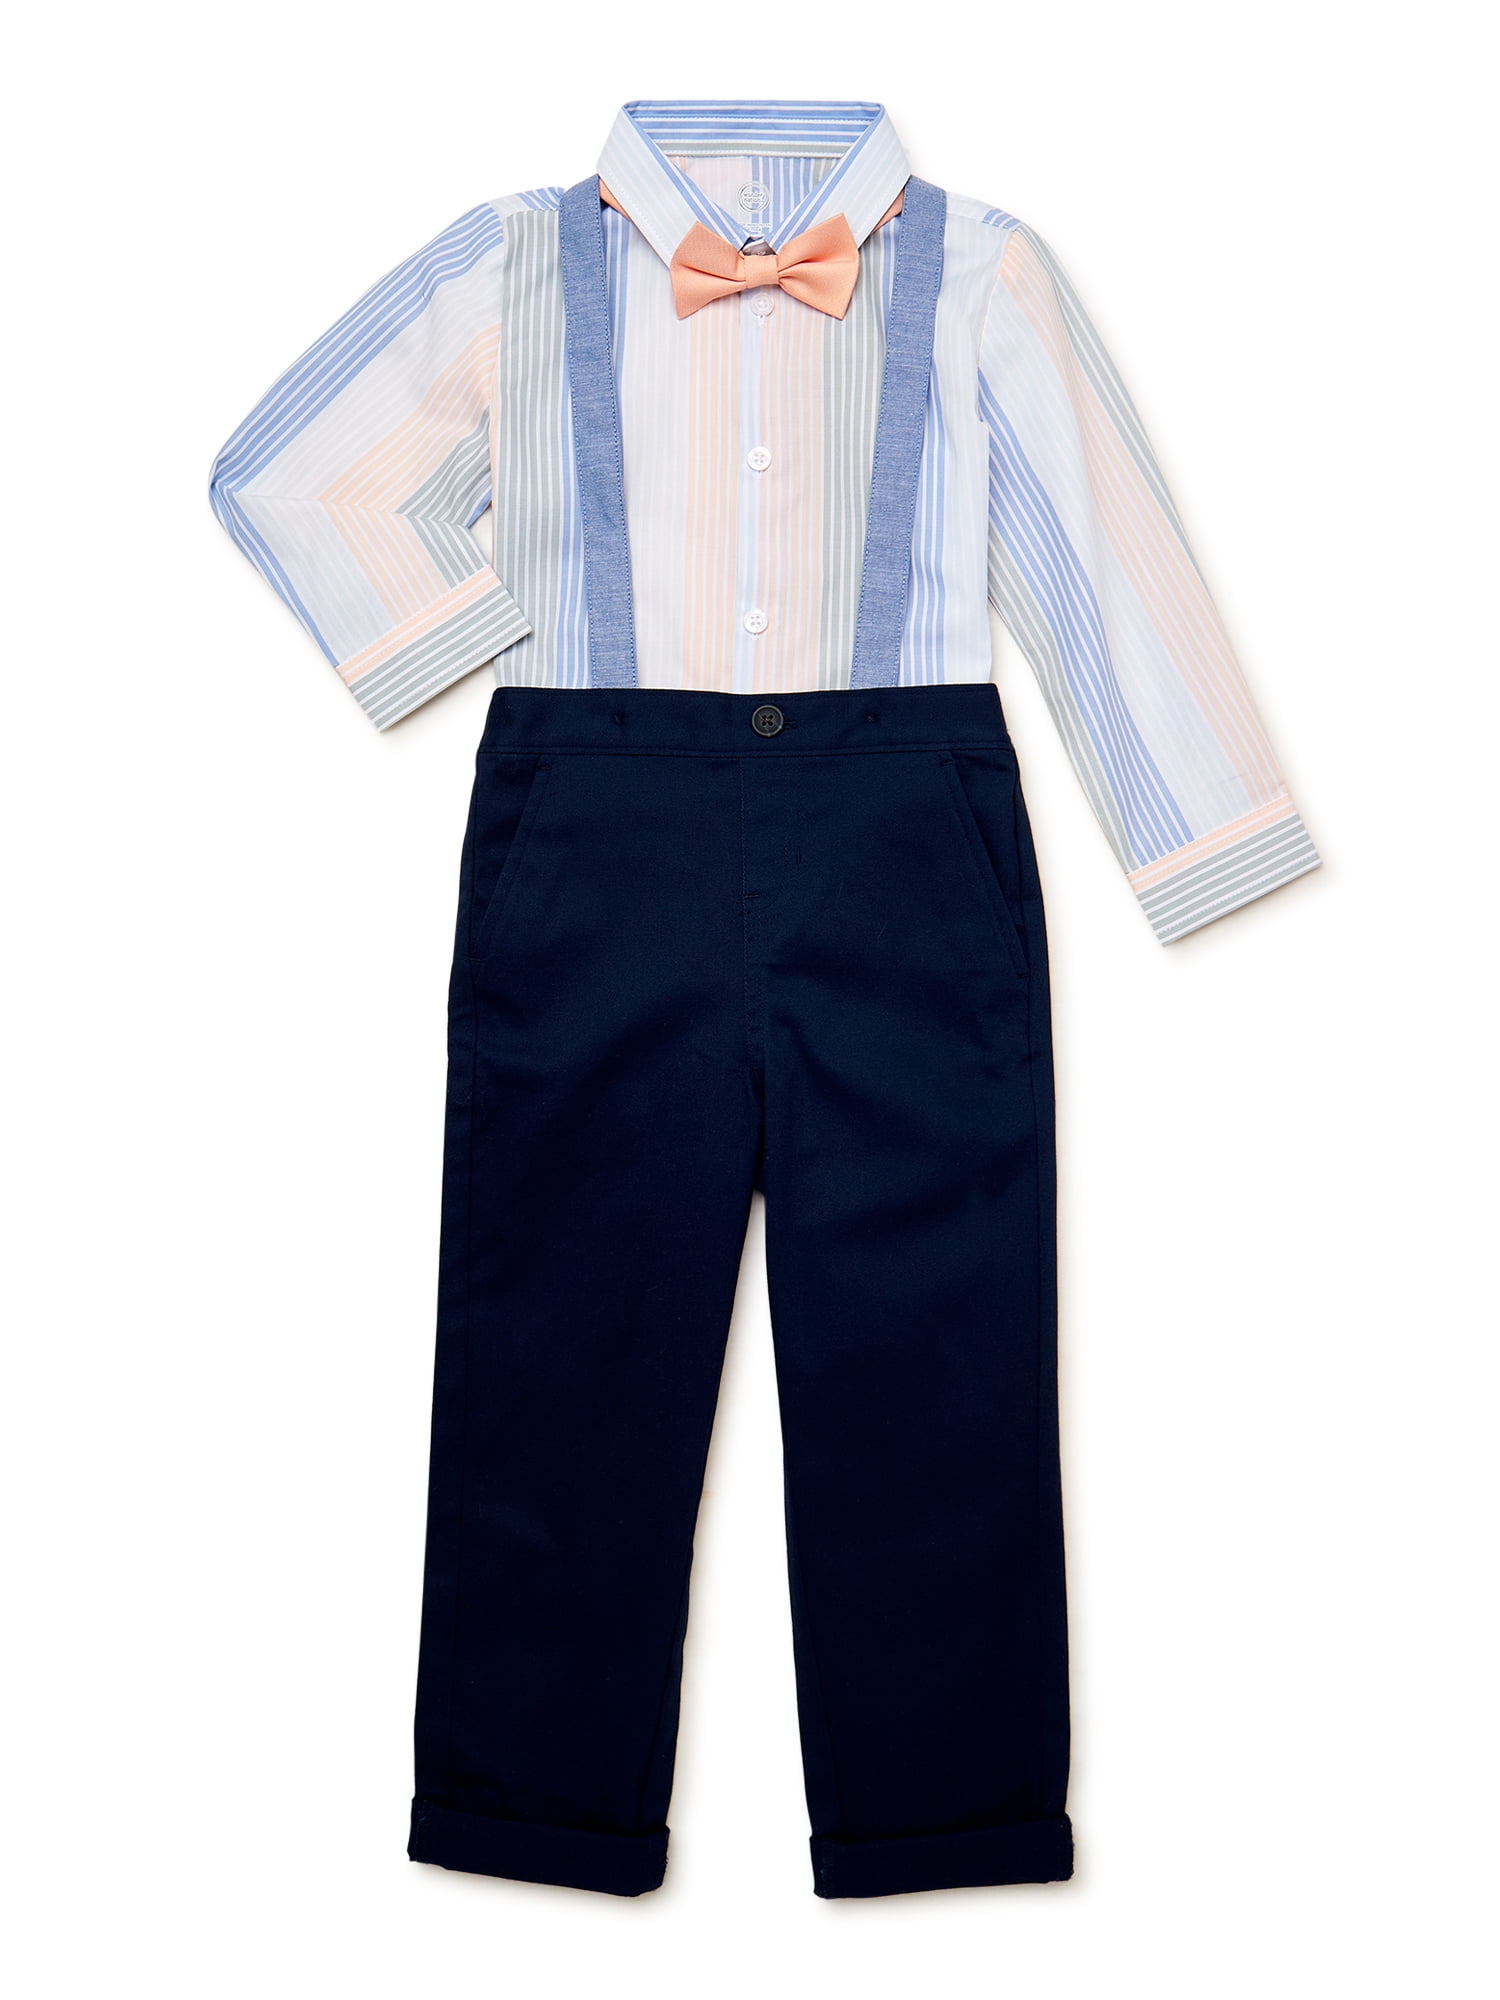 Wonder Nation Toddler Boys Shirt, Pants and Bowtie Outfit Set, 3-Piece, Sizes 12M-5T